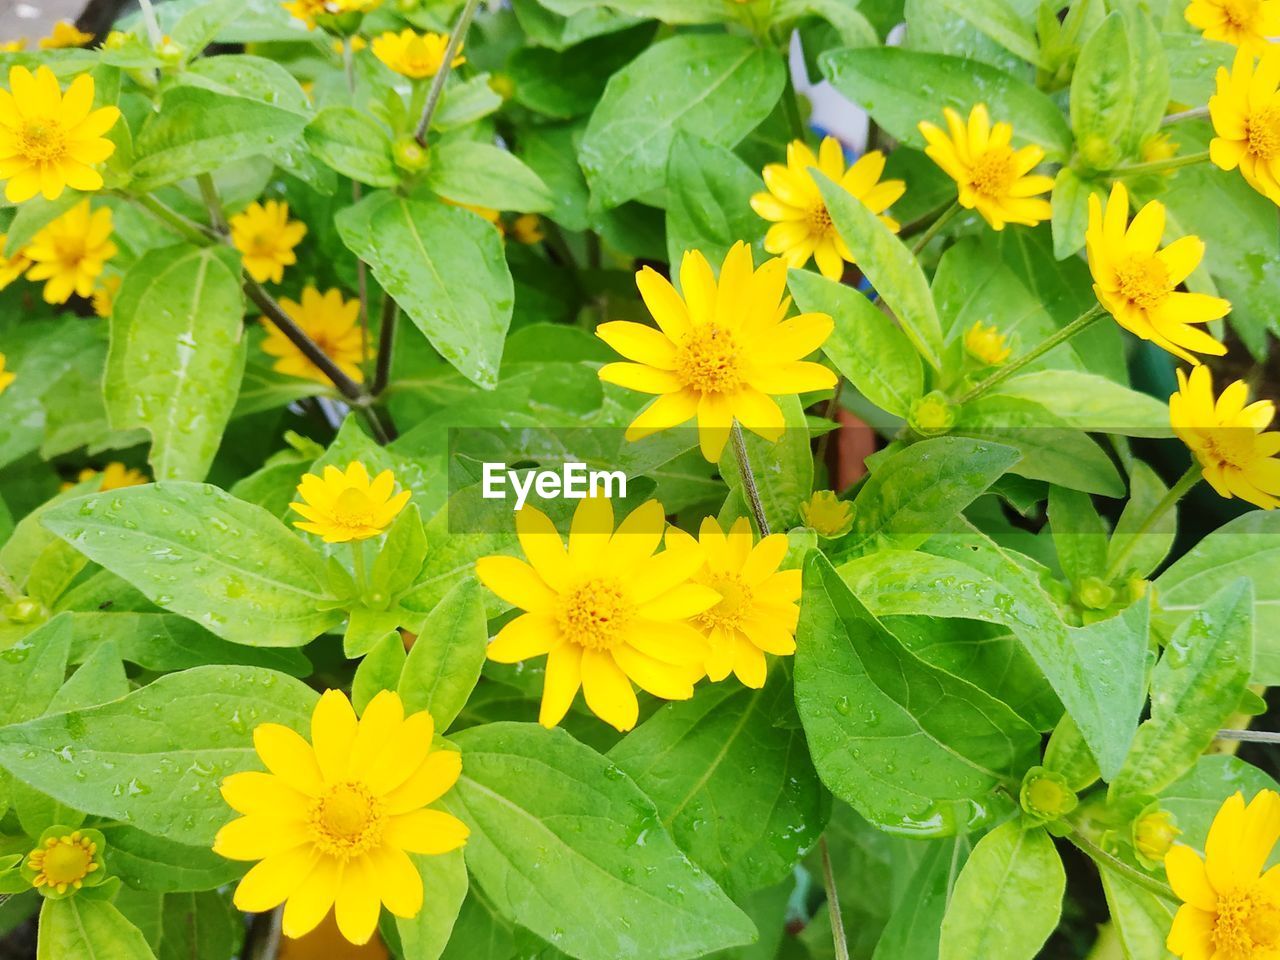 CLOSE-UP OF YELLOW FLOWERING PLANTS IN SUNLIGHT